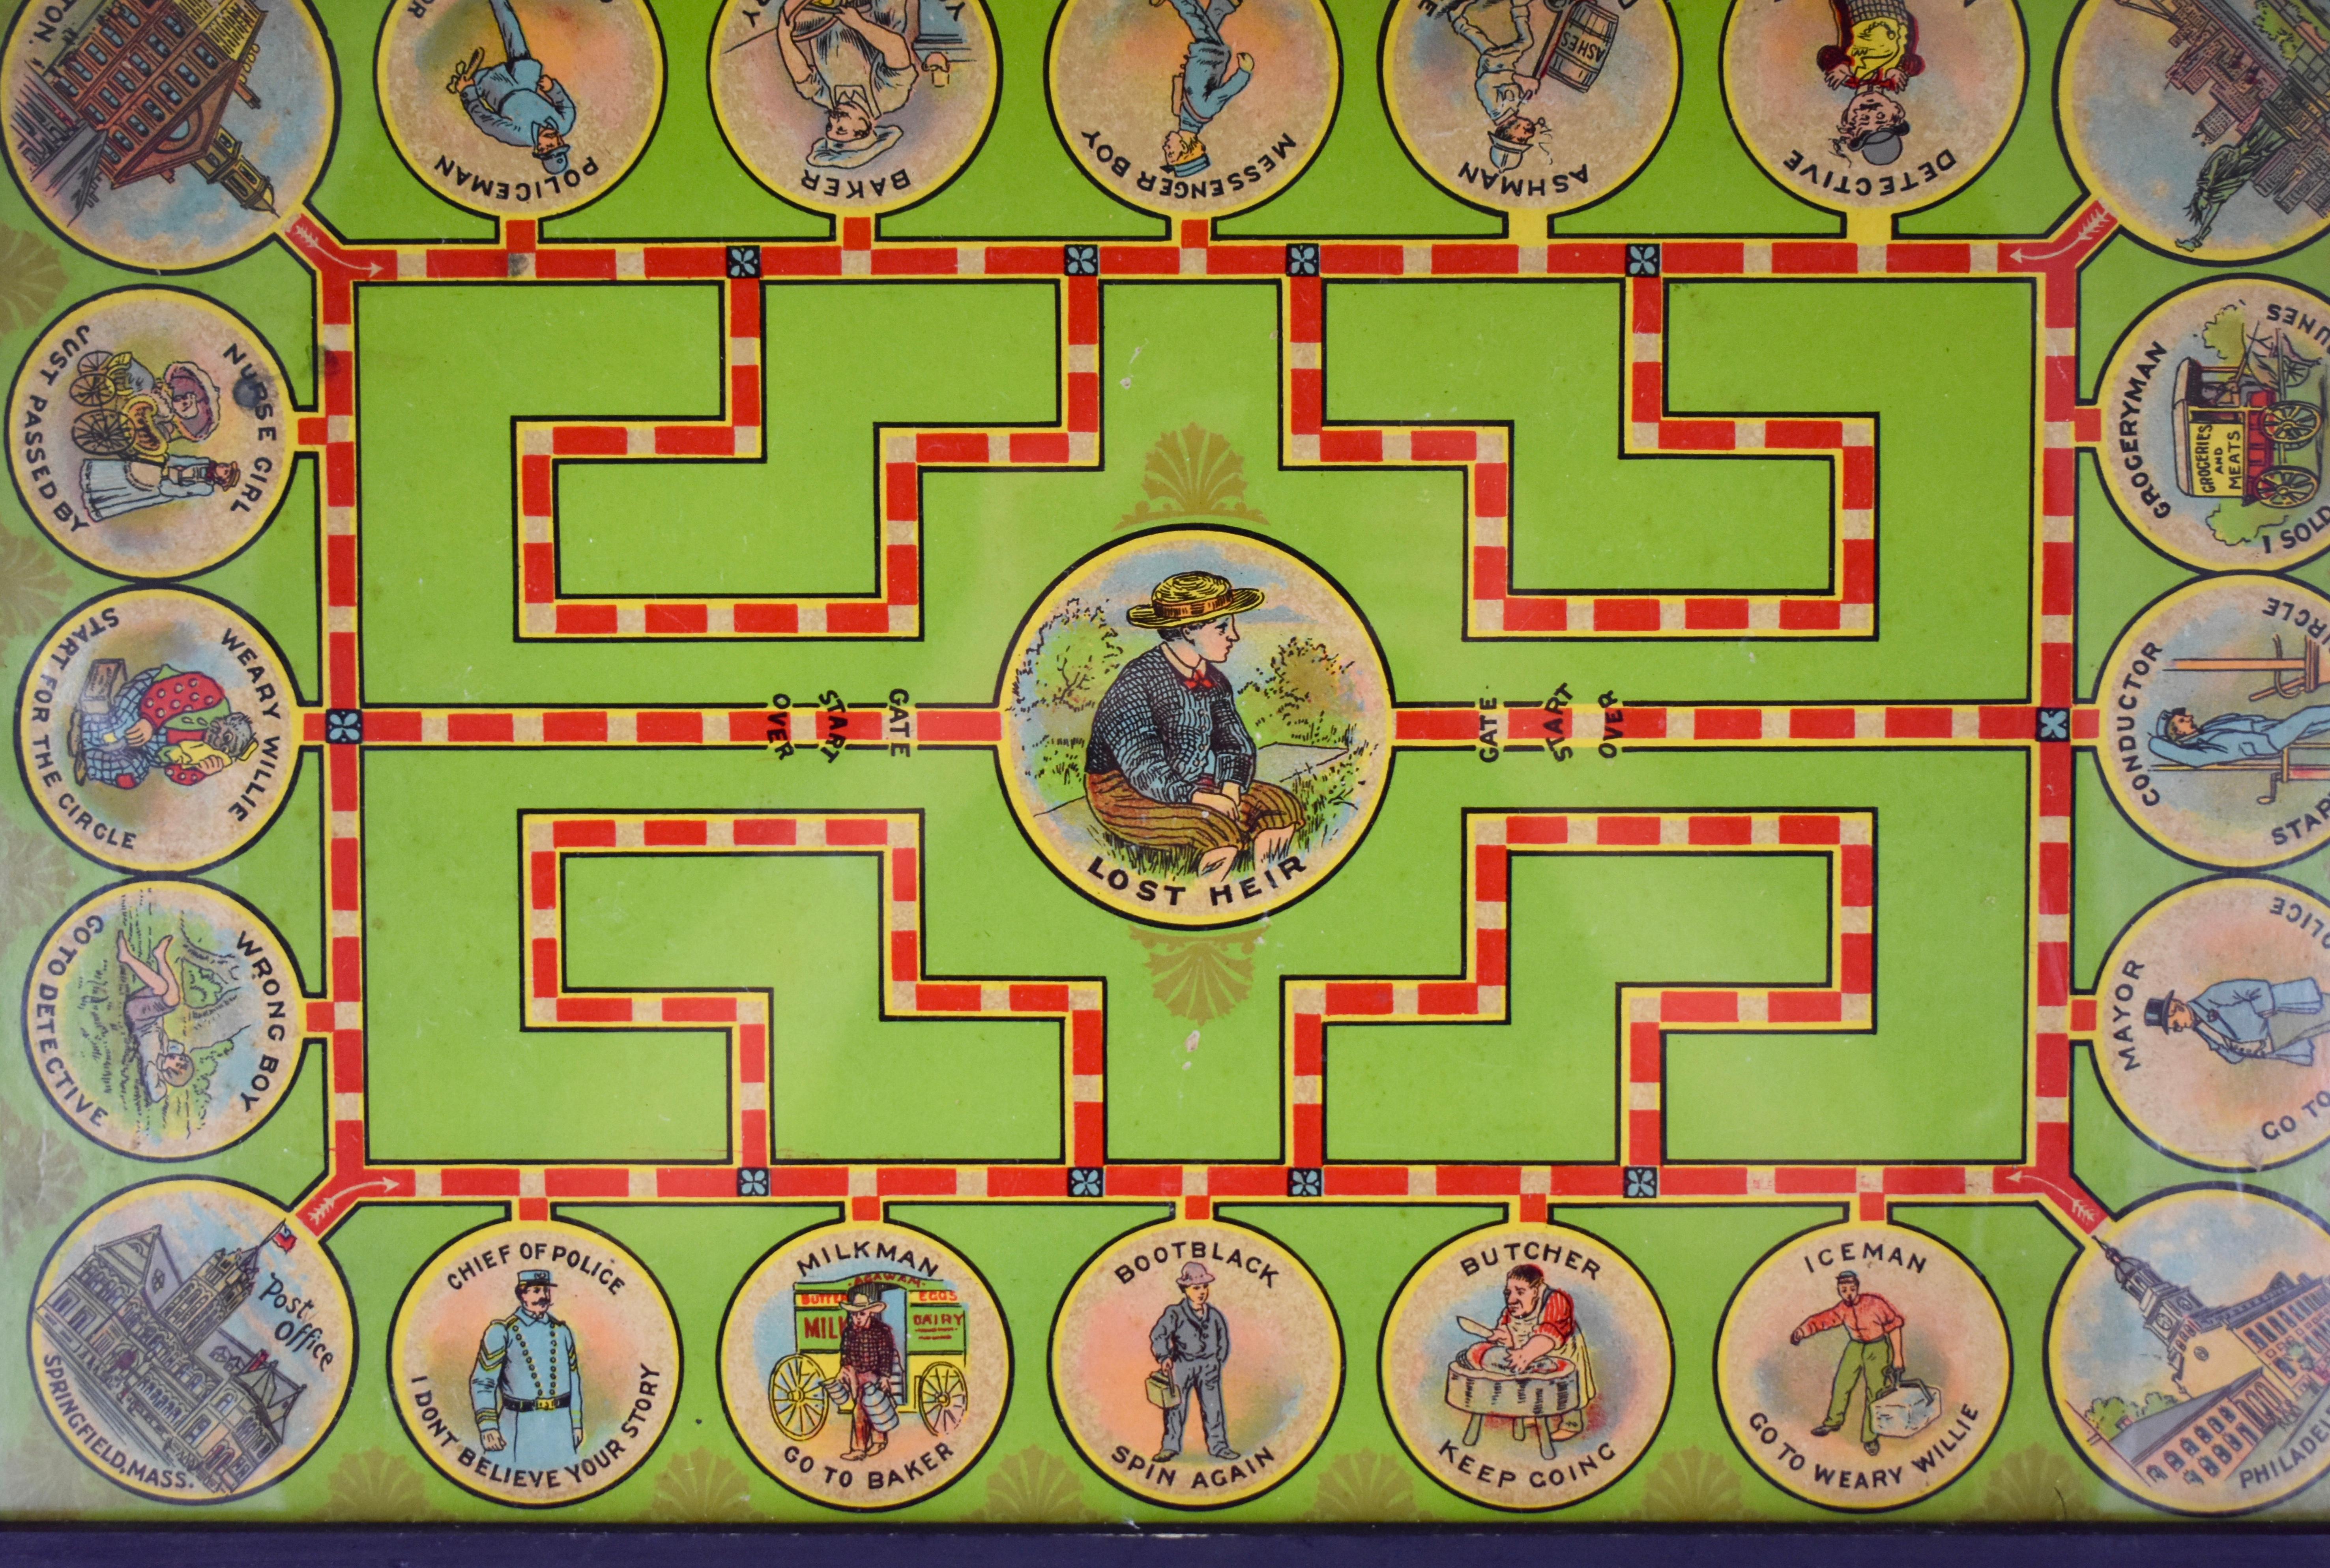 An original lithographed children's game board, Lost Heir, by The Milton Bradley Company of Springfield Massachusetts, dating to 1906.

A race to the end game based on the 1872 novel, “The Lost Heir of Linlithgow,” by the popular 19th Century